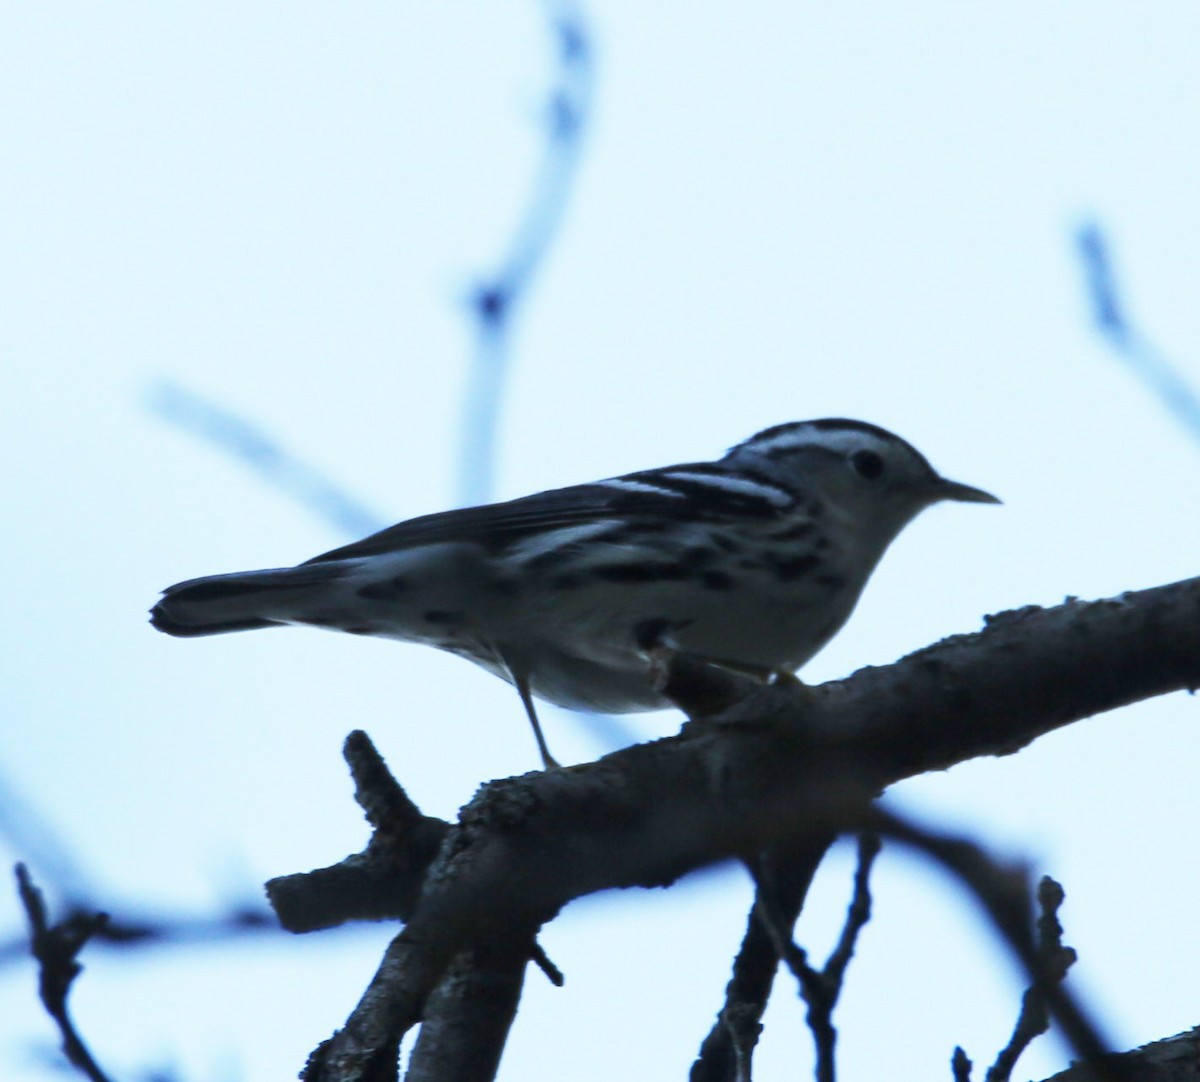 Black-and-white Warbler - Cathy Cox